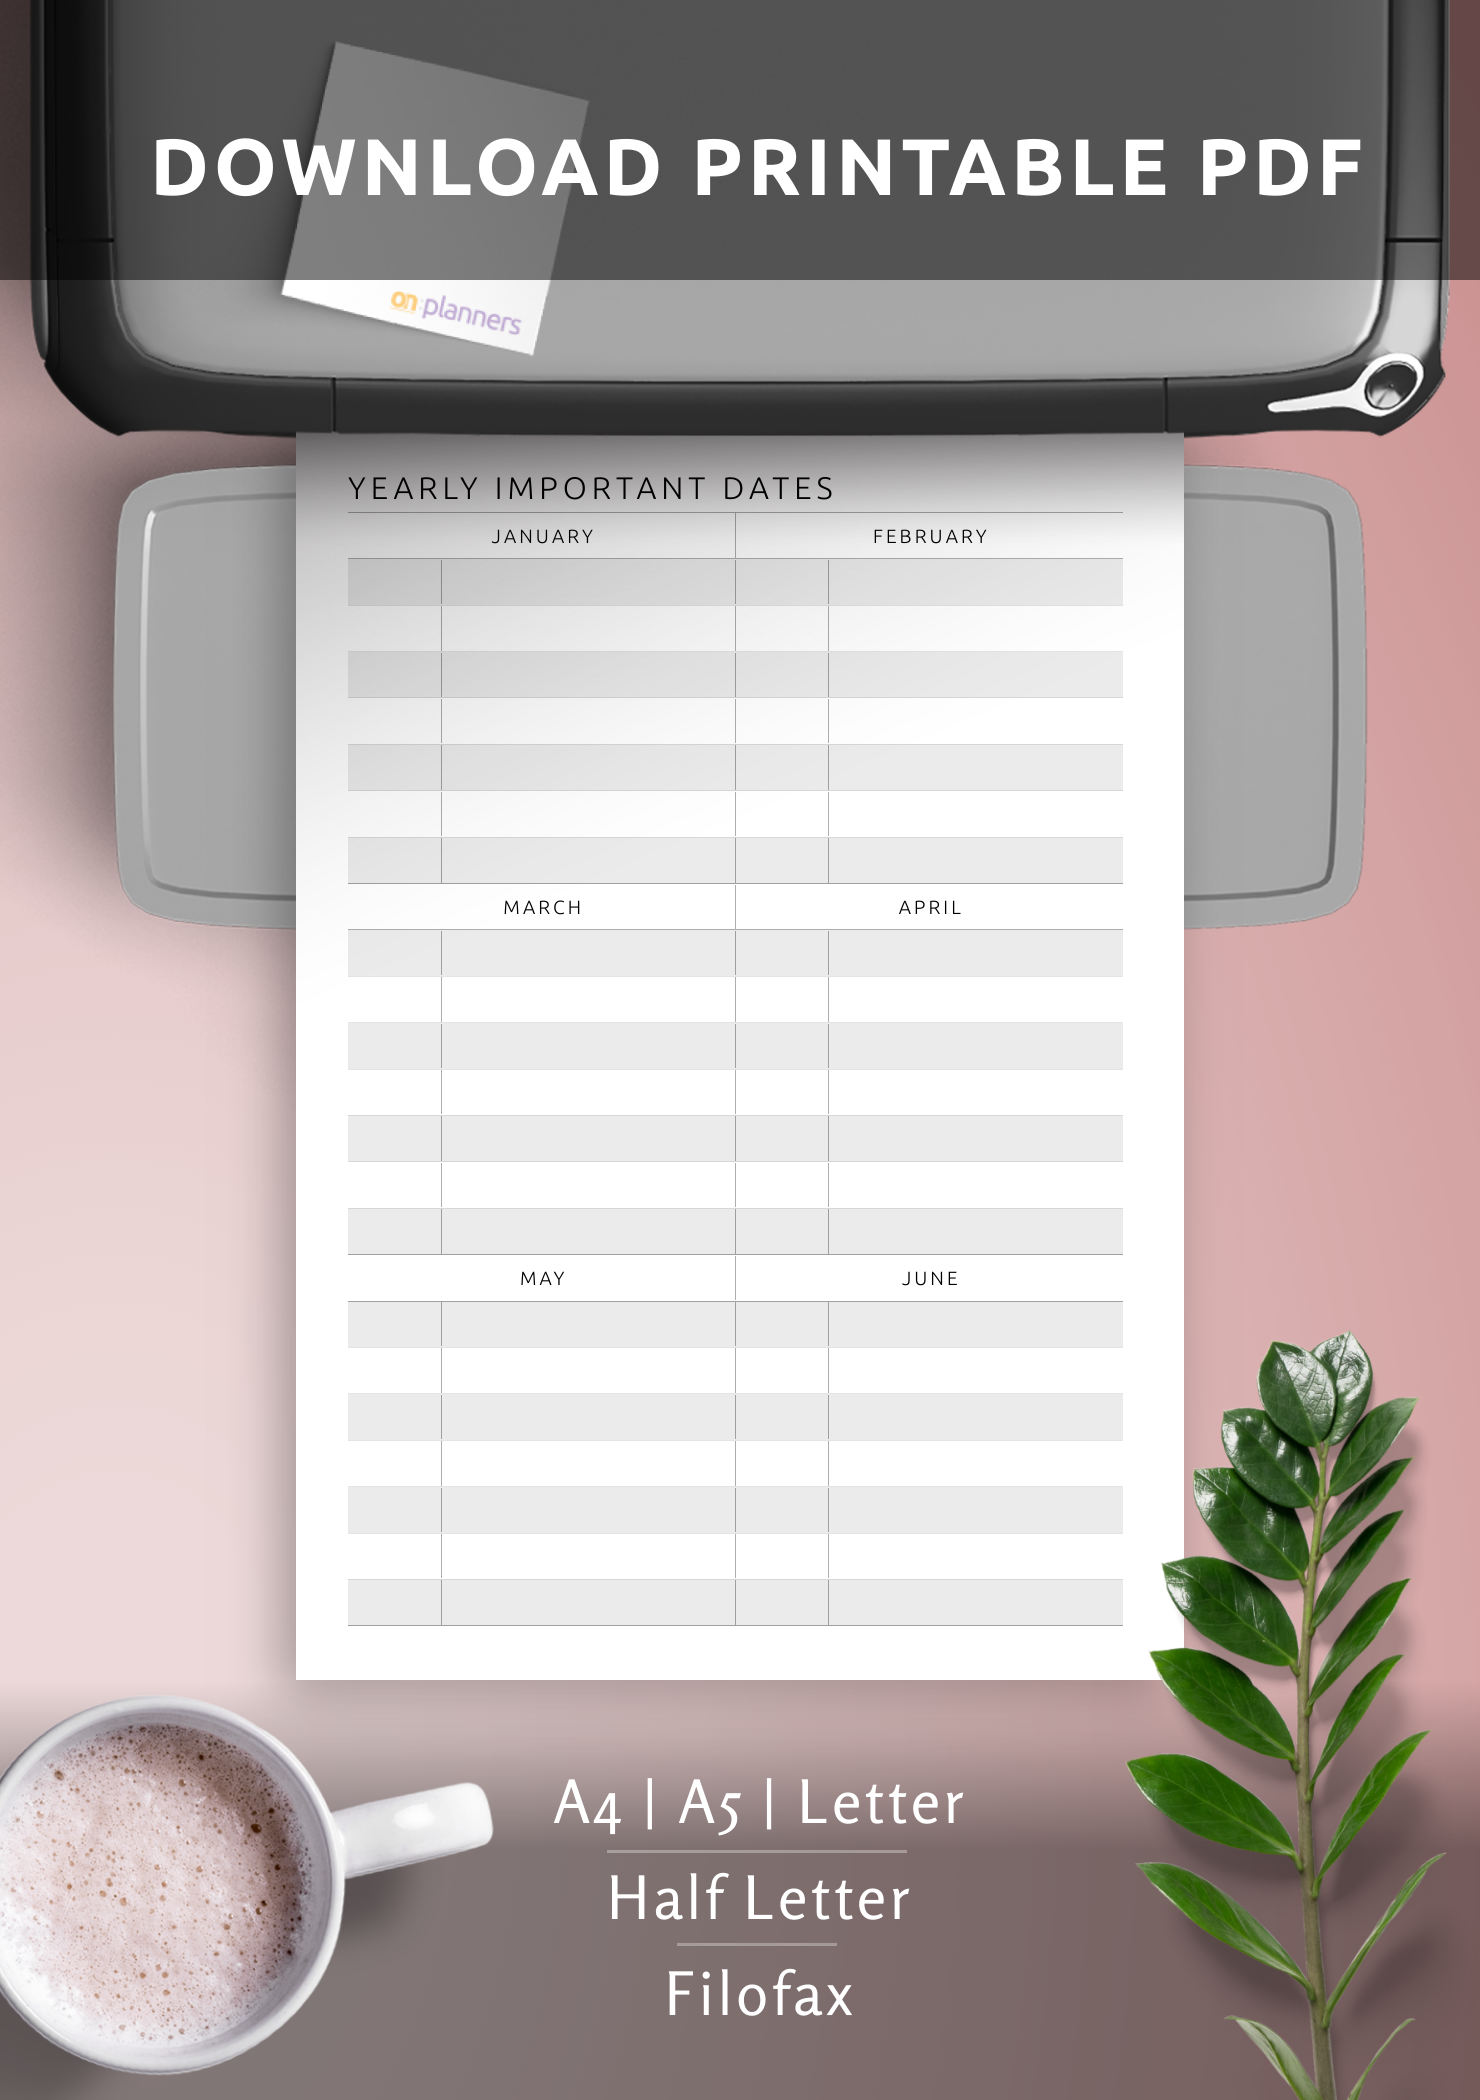 download-printable-yearly-important-dates-template-pdf